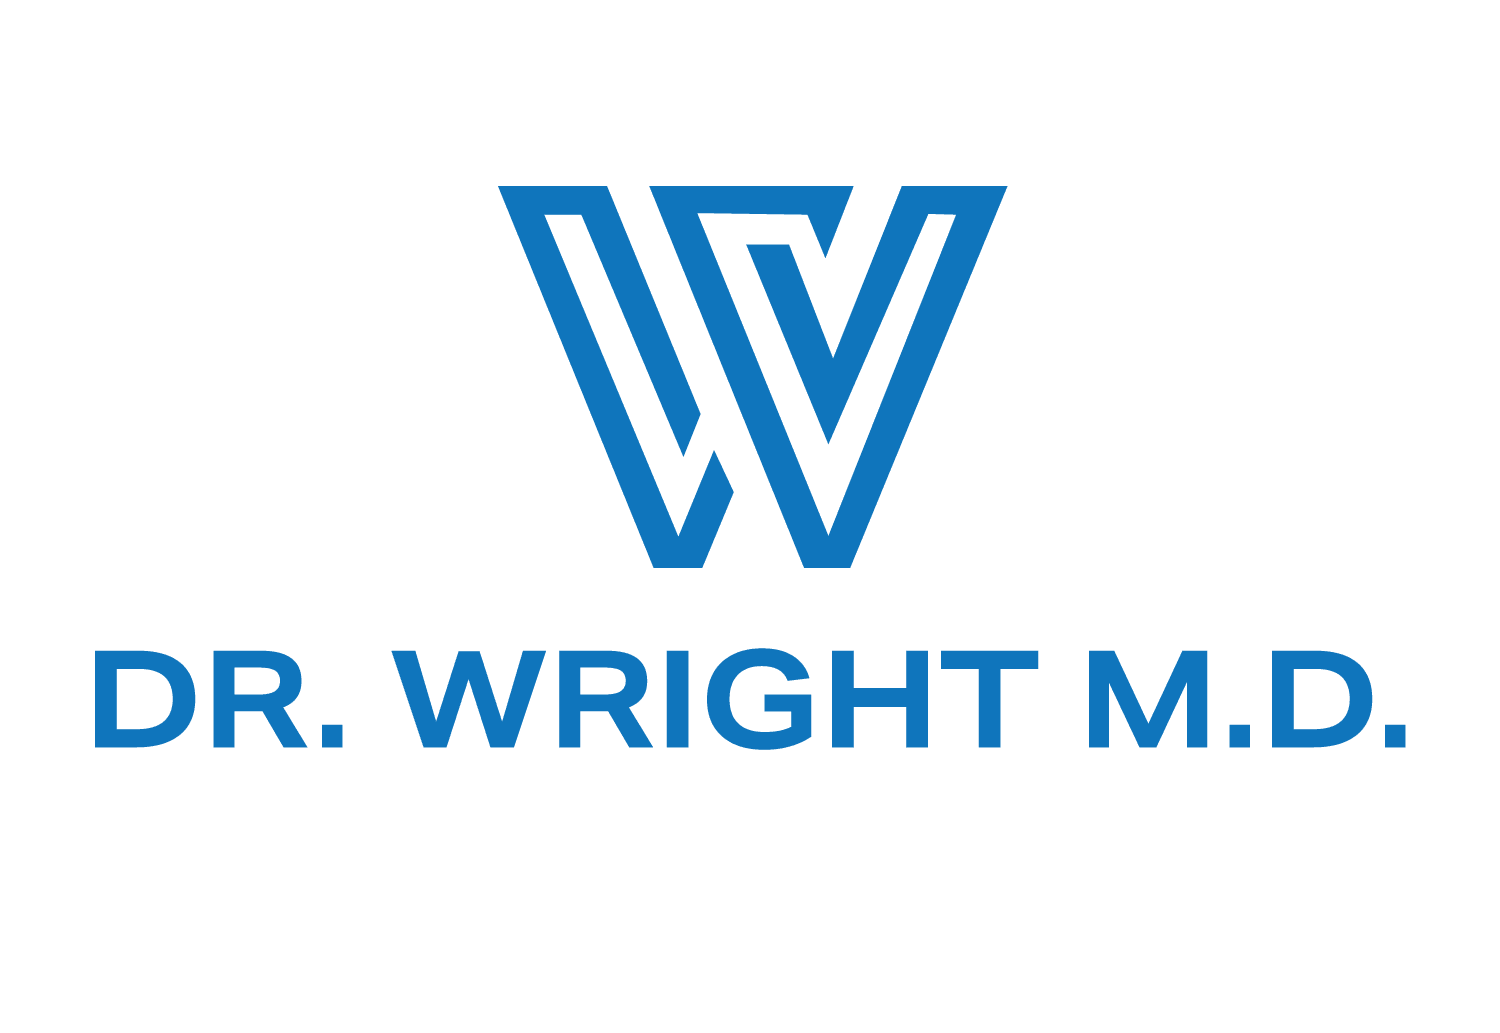 DR. WRIGHT M.D.